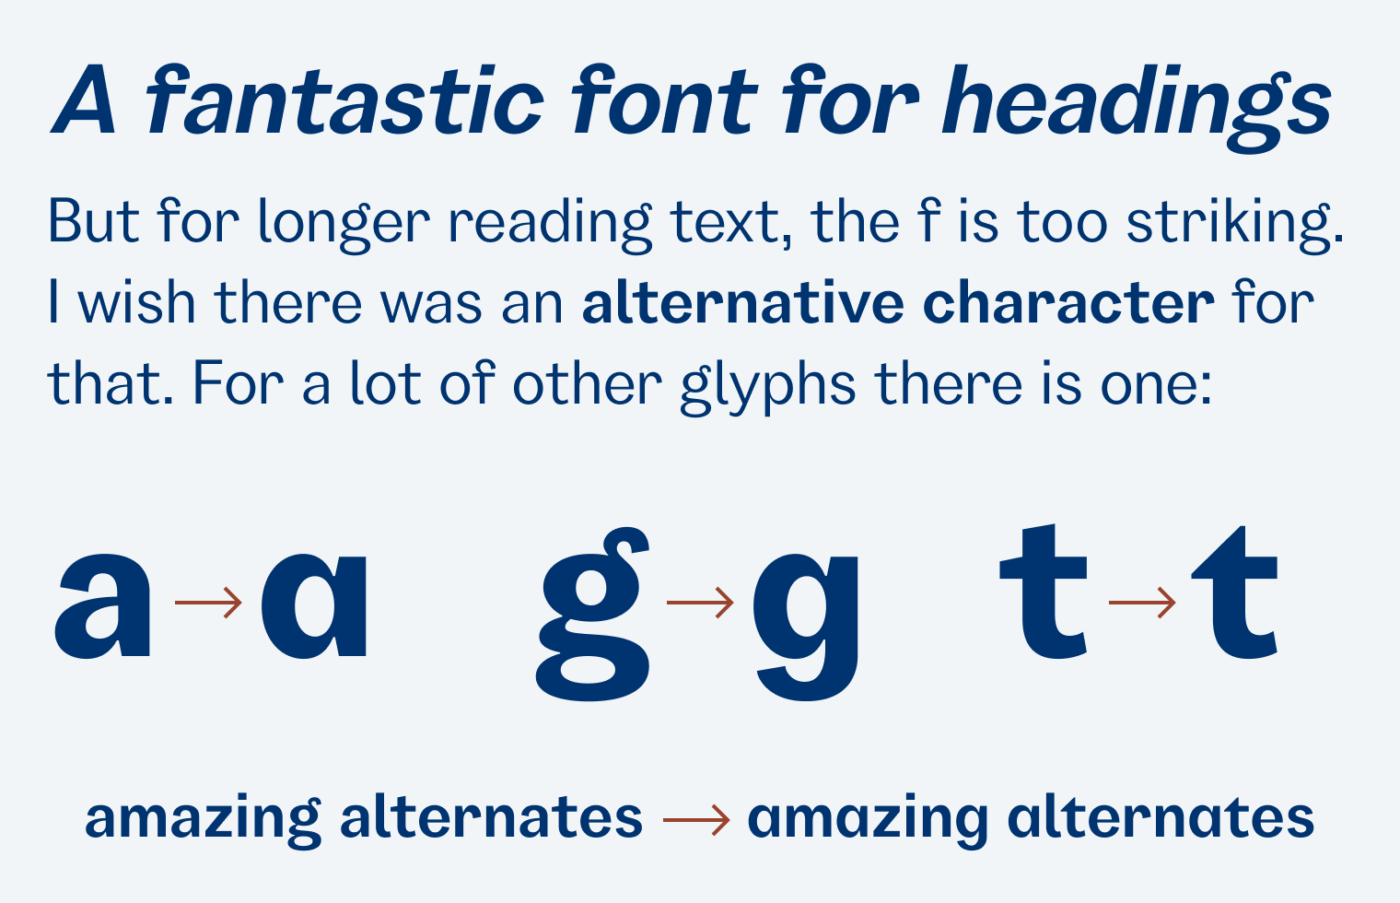 A fantastic font for headings. But for longer reading text, the f is too striking. I wish there was an alternative character for that. For a lot of other glyphs there is one: a, g, t.